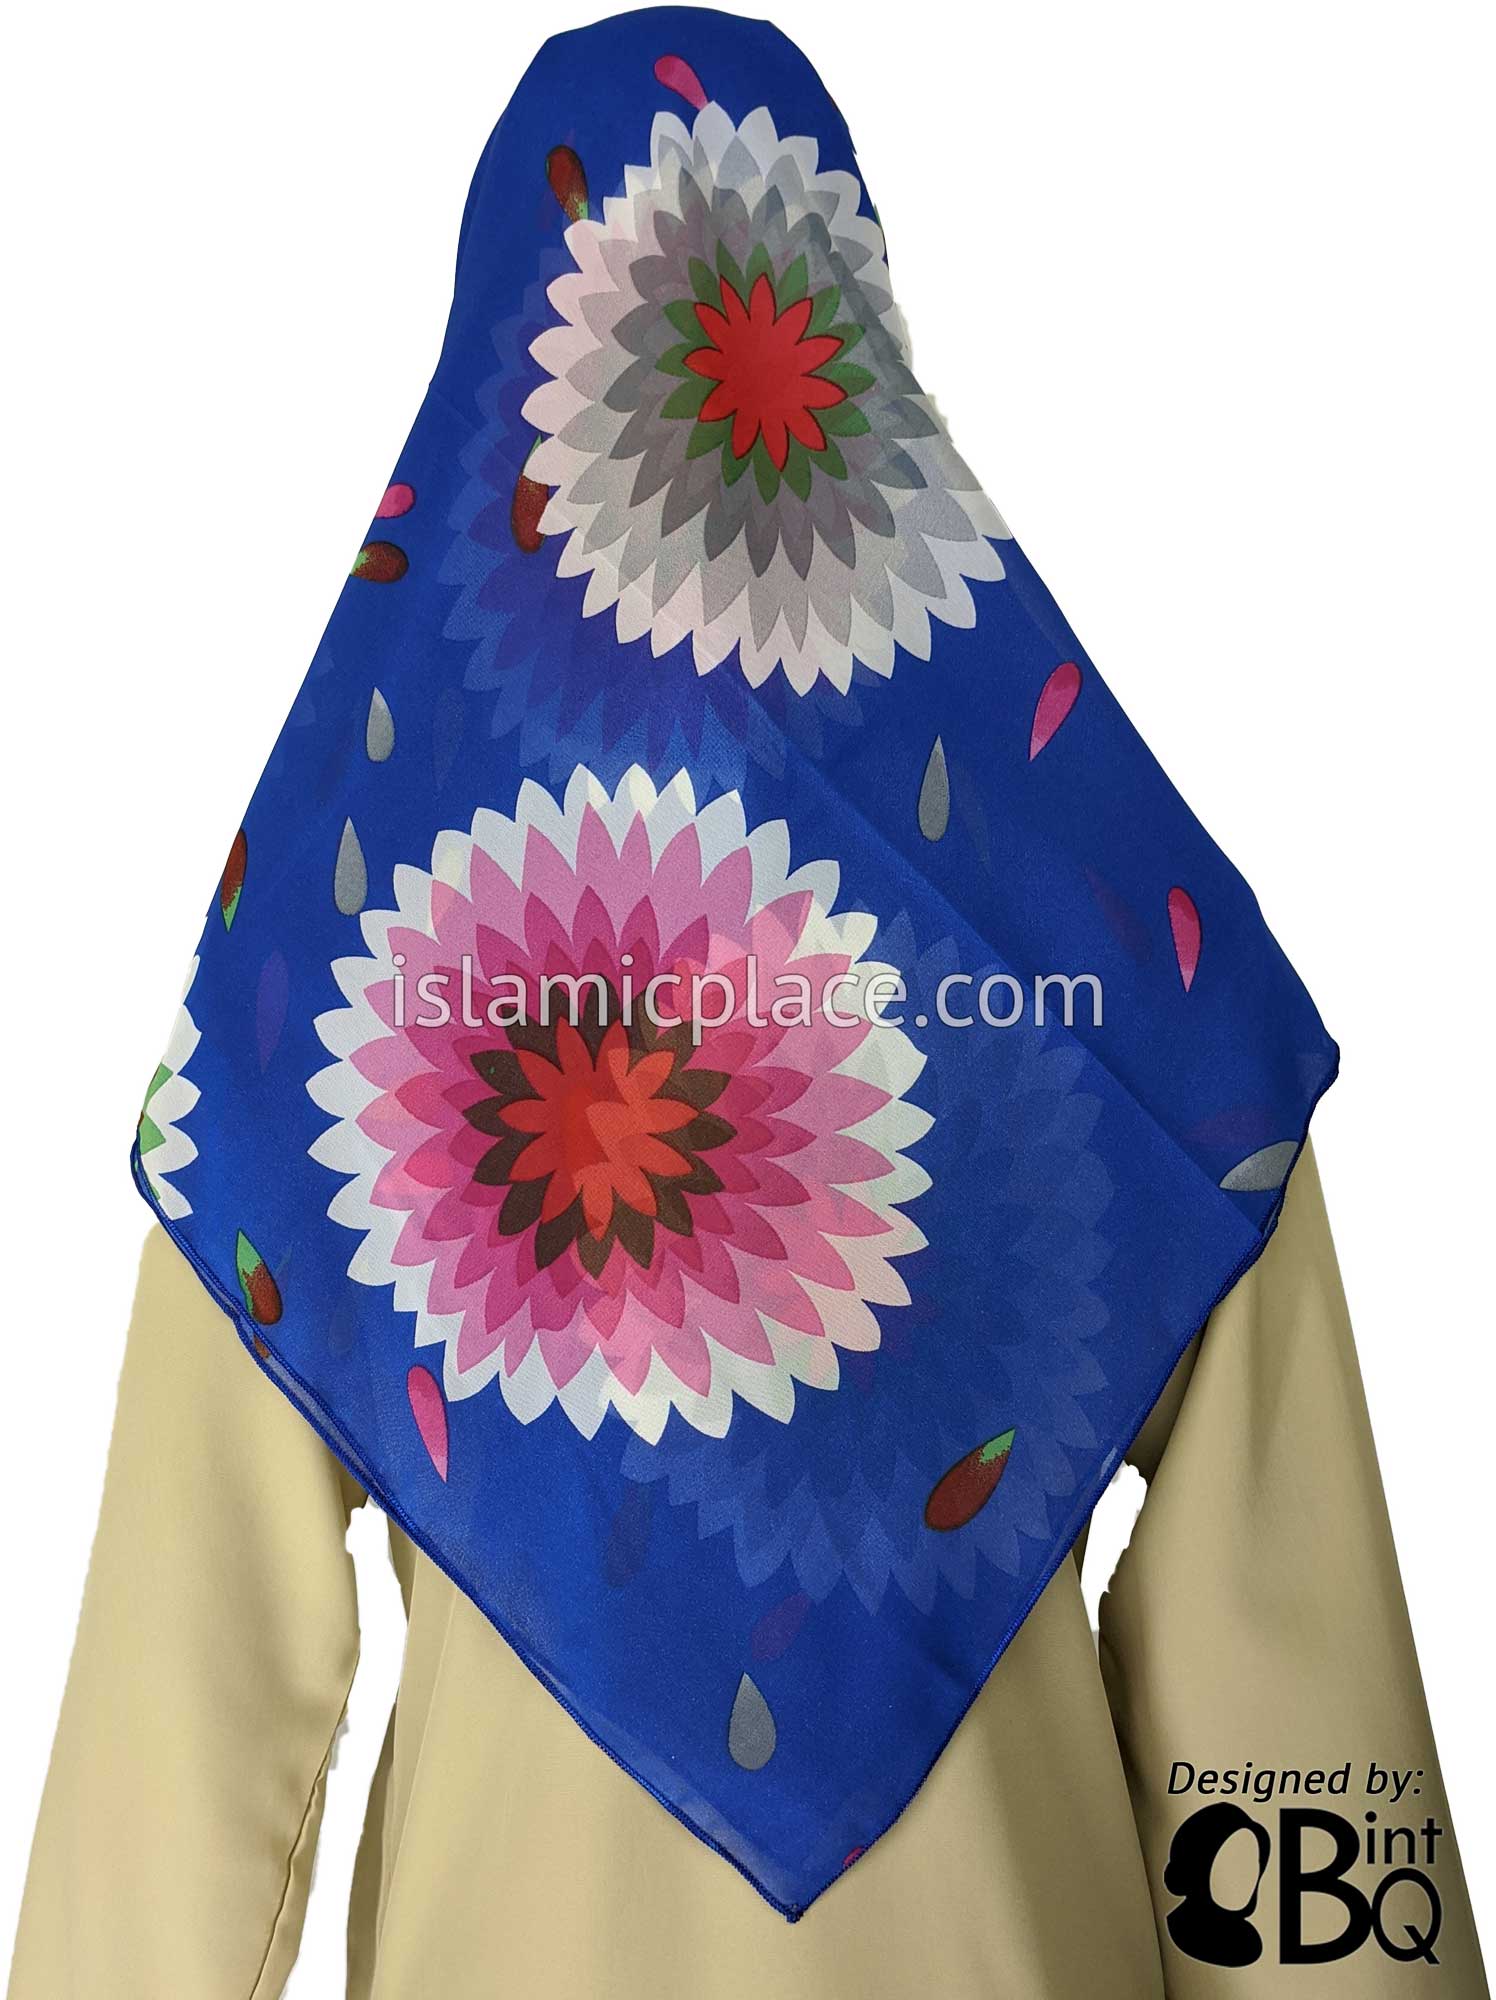 Enlarged Flowers and Petals on Blue Sky - 45" Square Printed Khimar